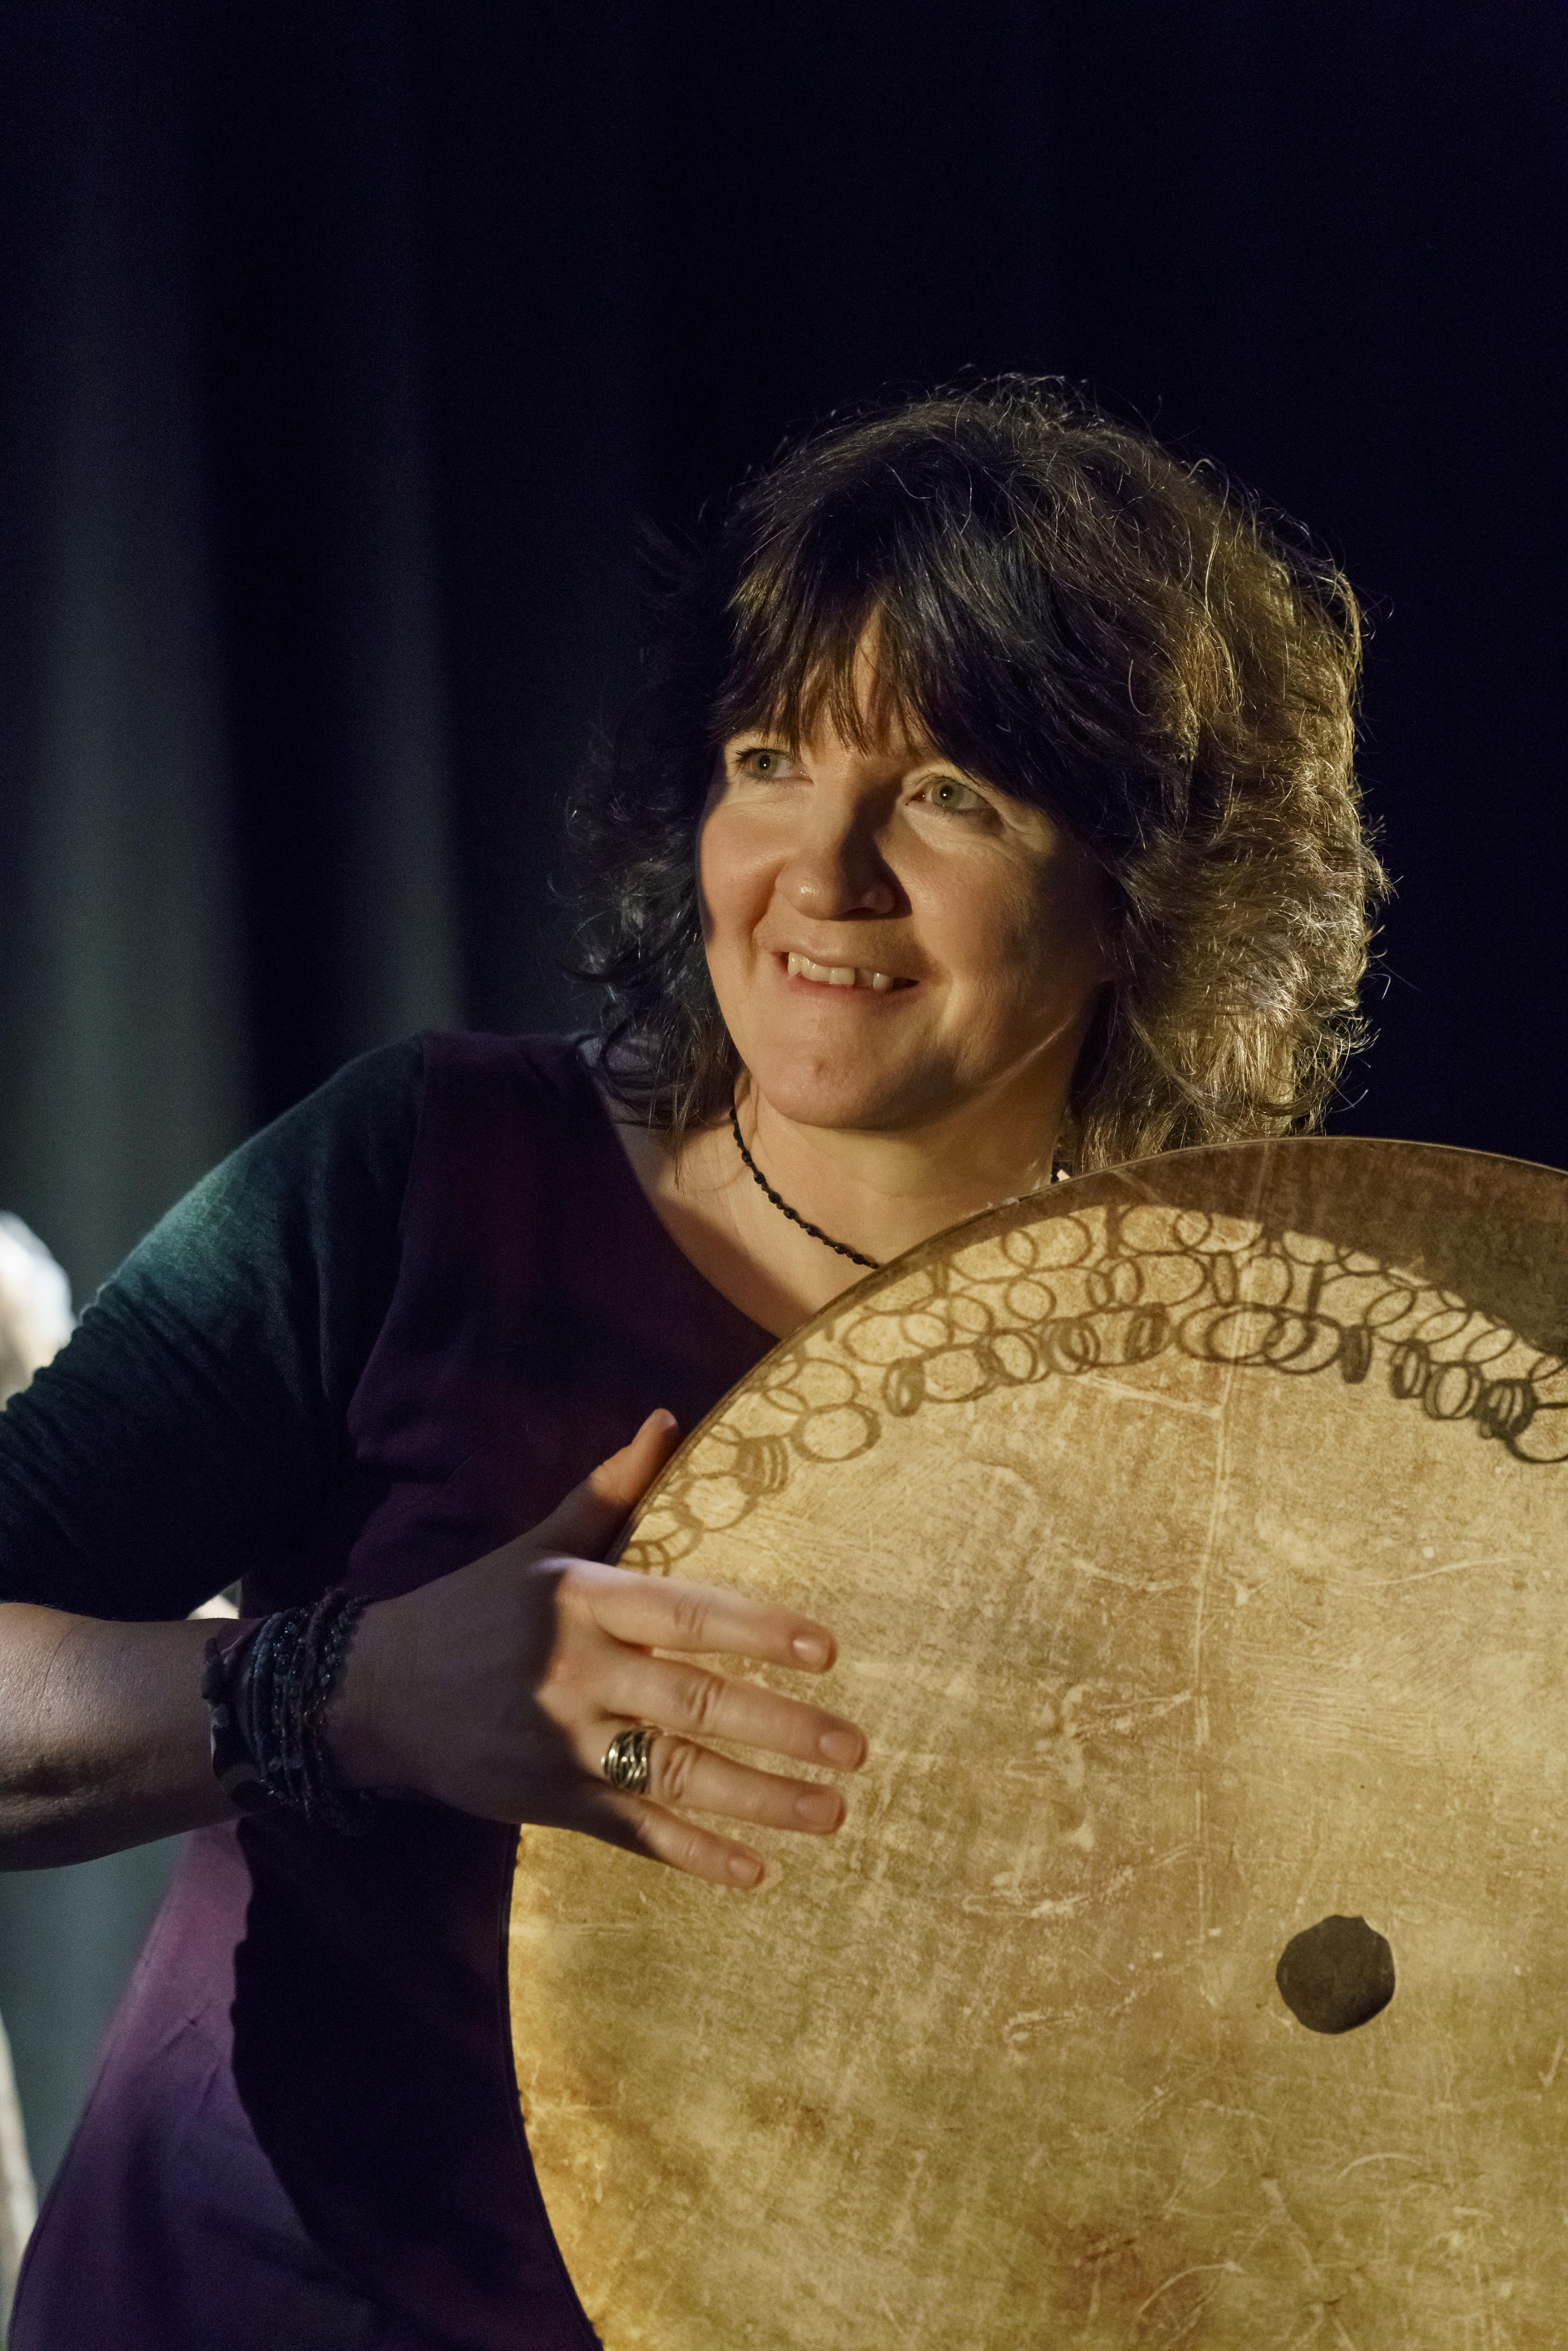 a white woman with shoulder length brown hair, playing a large drum